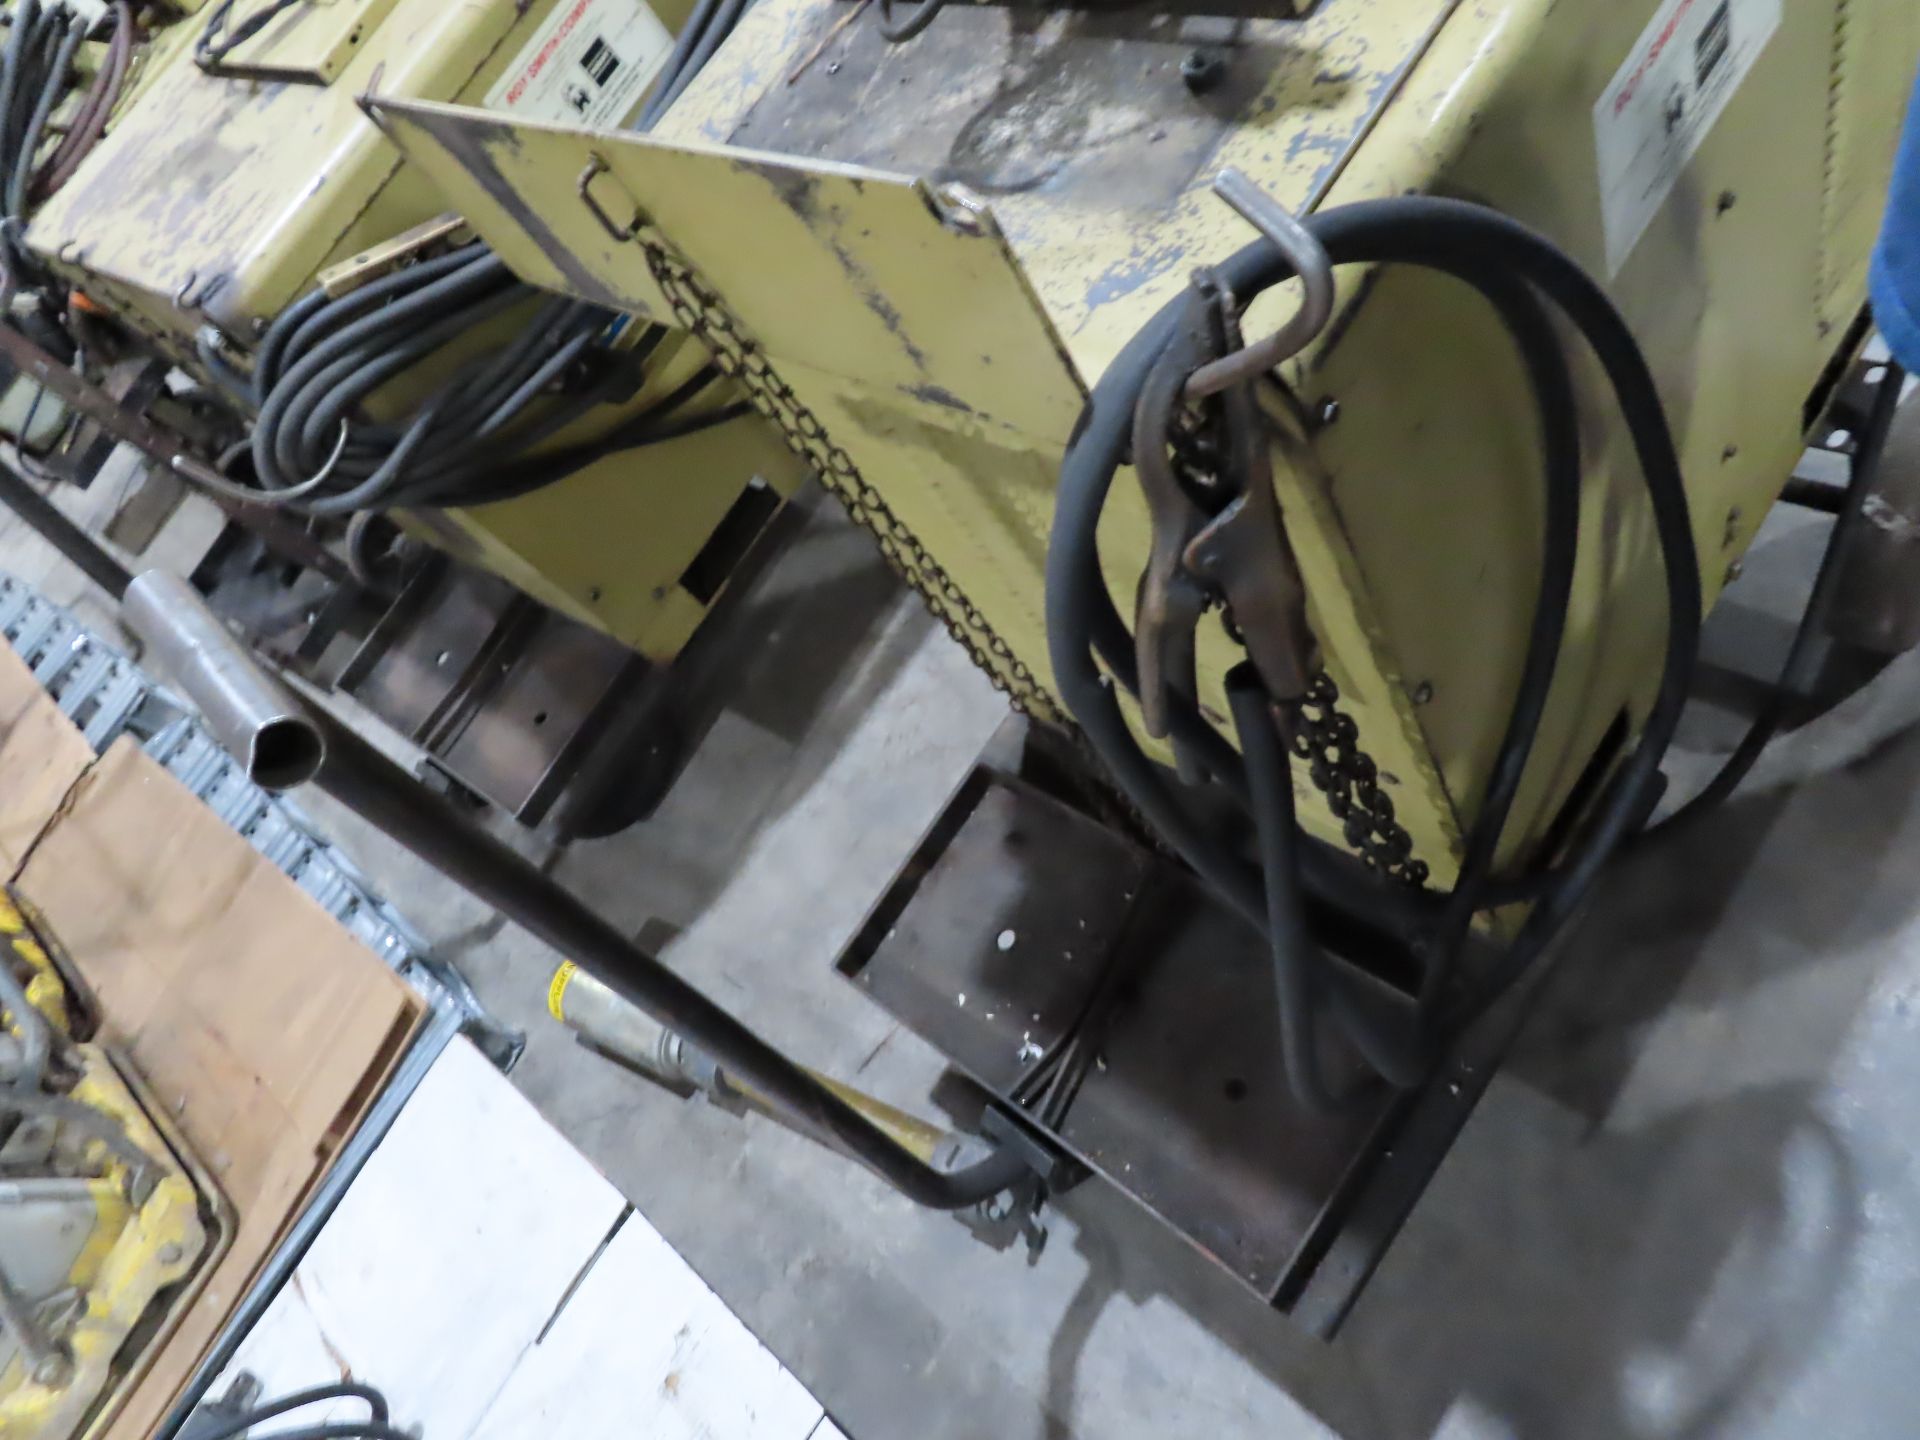 Hobart 300 amp welder with Hobart 2410 feed unit. This item can be picked up onsite with no - Image 6 of 6